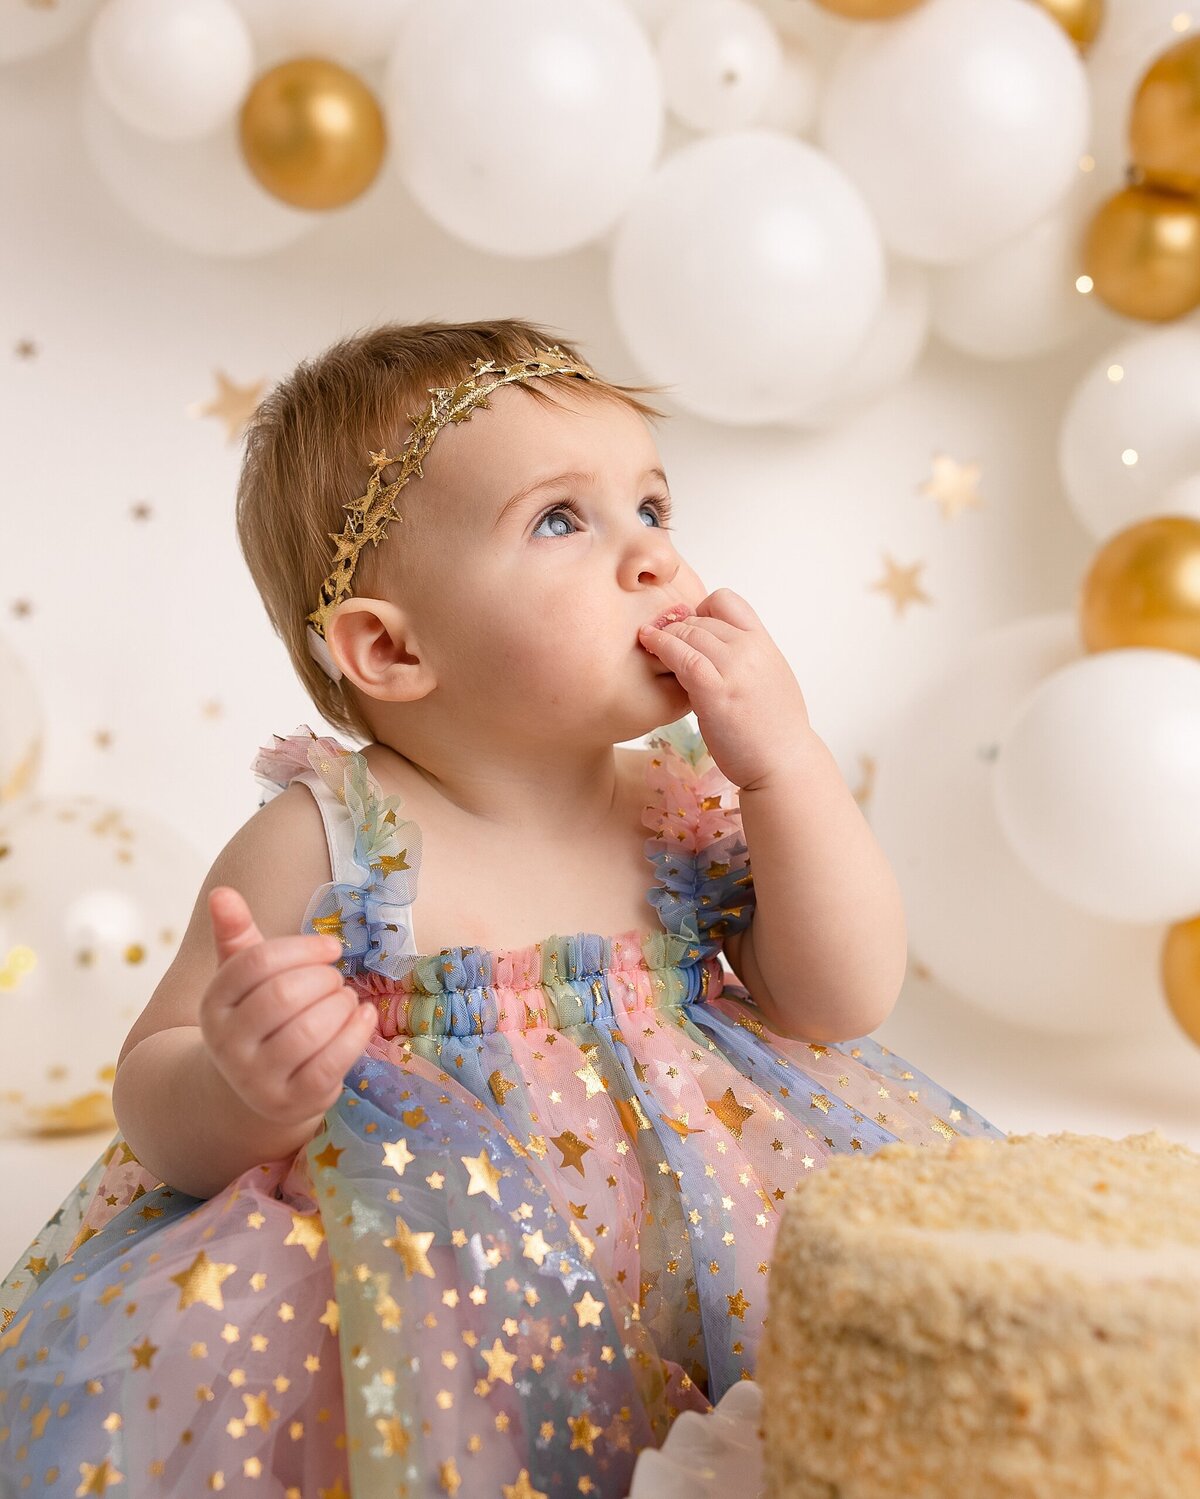 baby eating cake for first birthday in rainbow dress